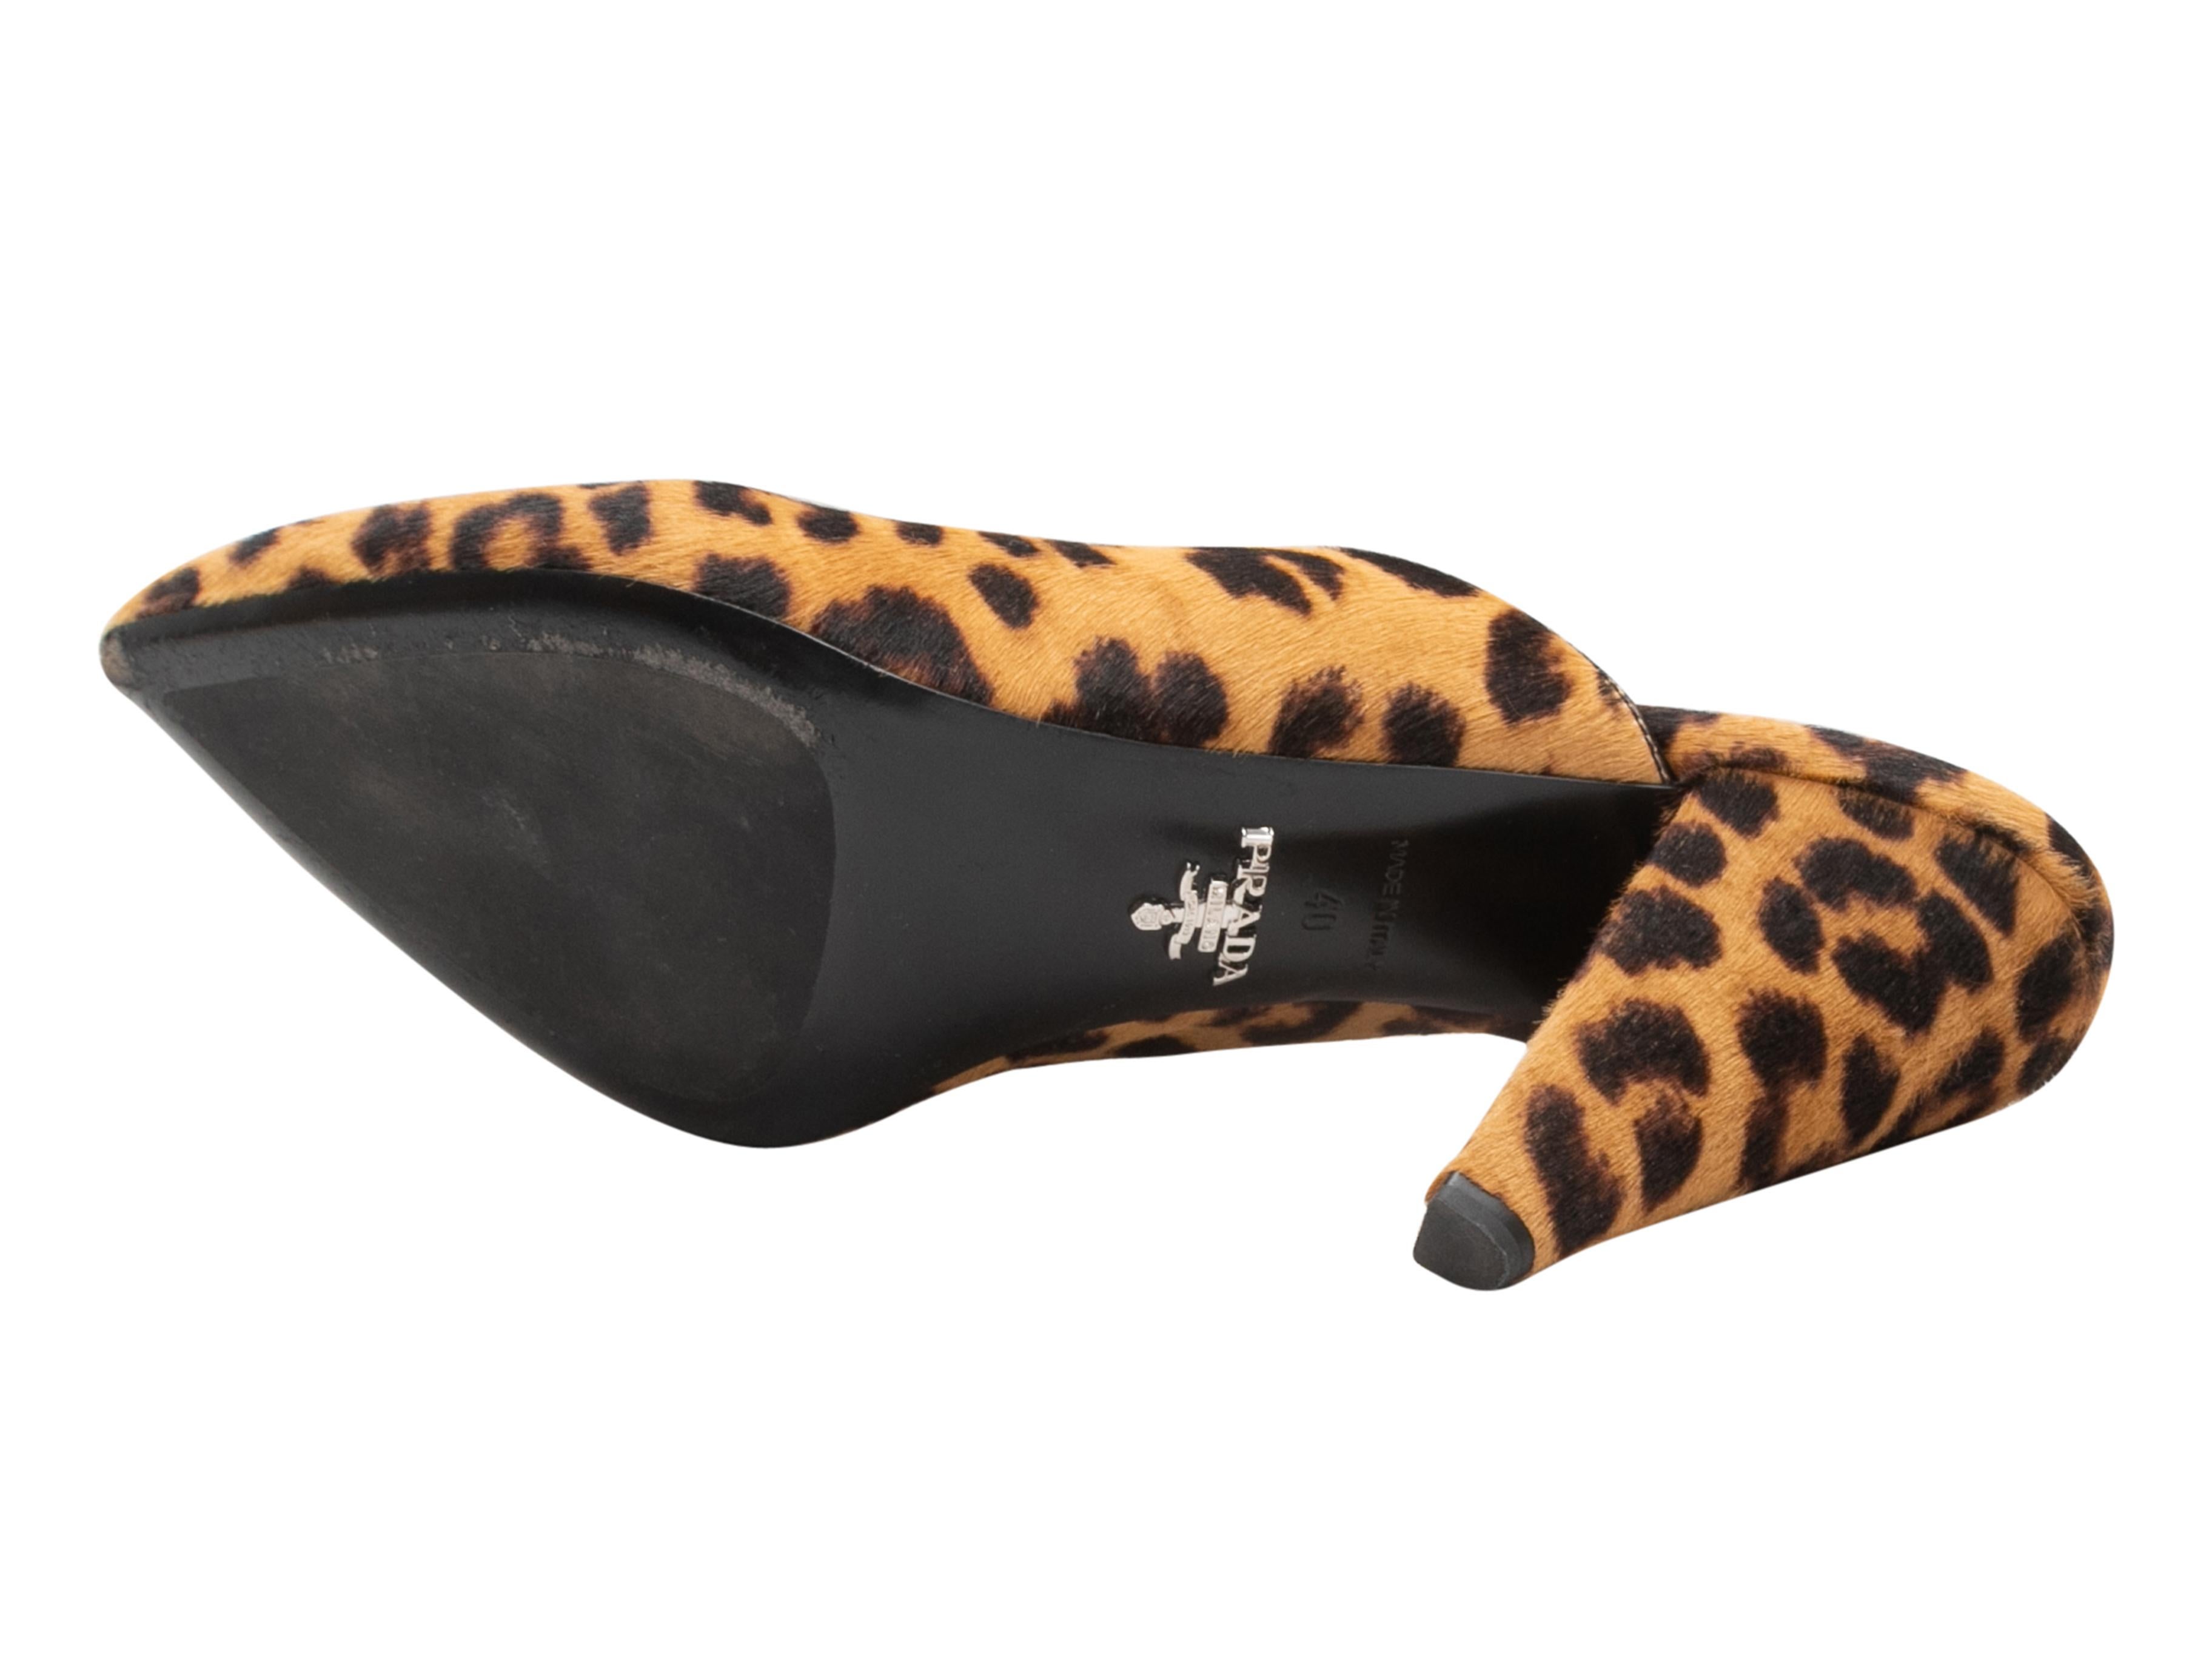 Tan and black leopard print pointed-toe ponyhair mules by Prada. 4